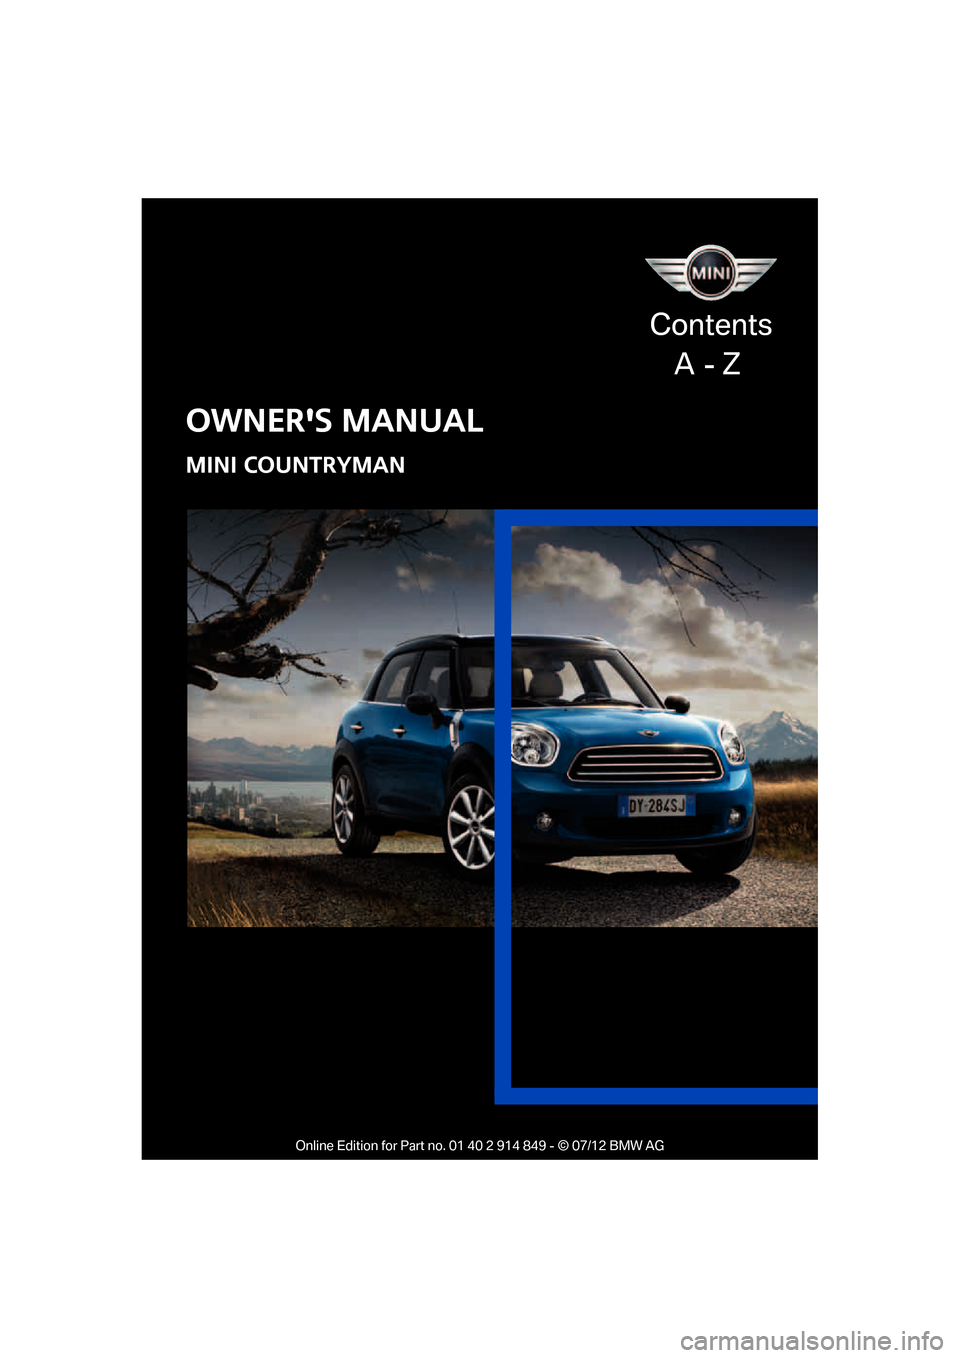 MINI Countryman 2012  Owners Manual (Mini Connected)  
OWNERS MANUAL
MINI COUNTRYMAN
Contents
    A  - Z

Online Edition for Part no. 01 40 2 914 849 - © 07/12 BMW AG  